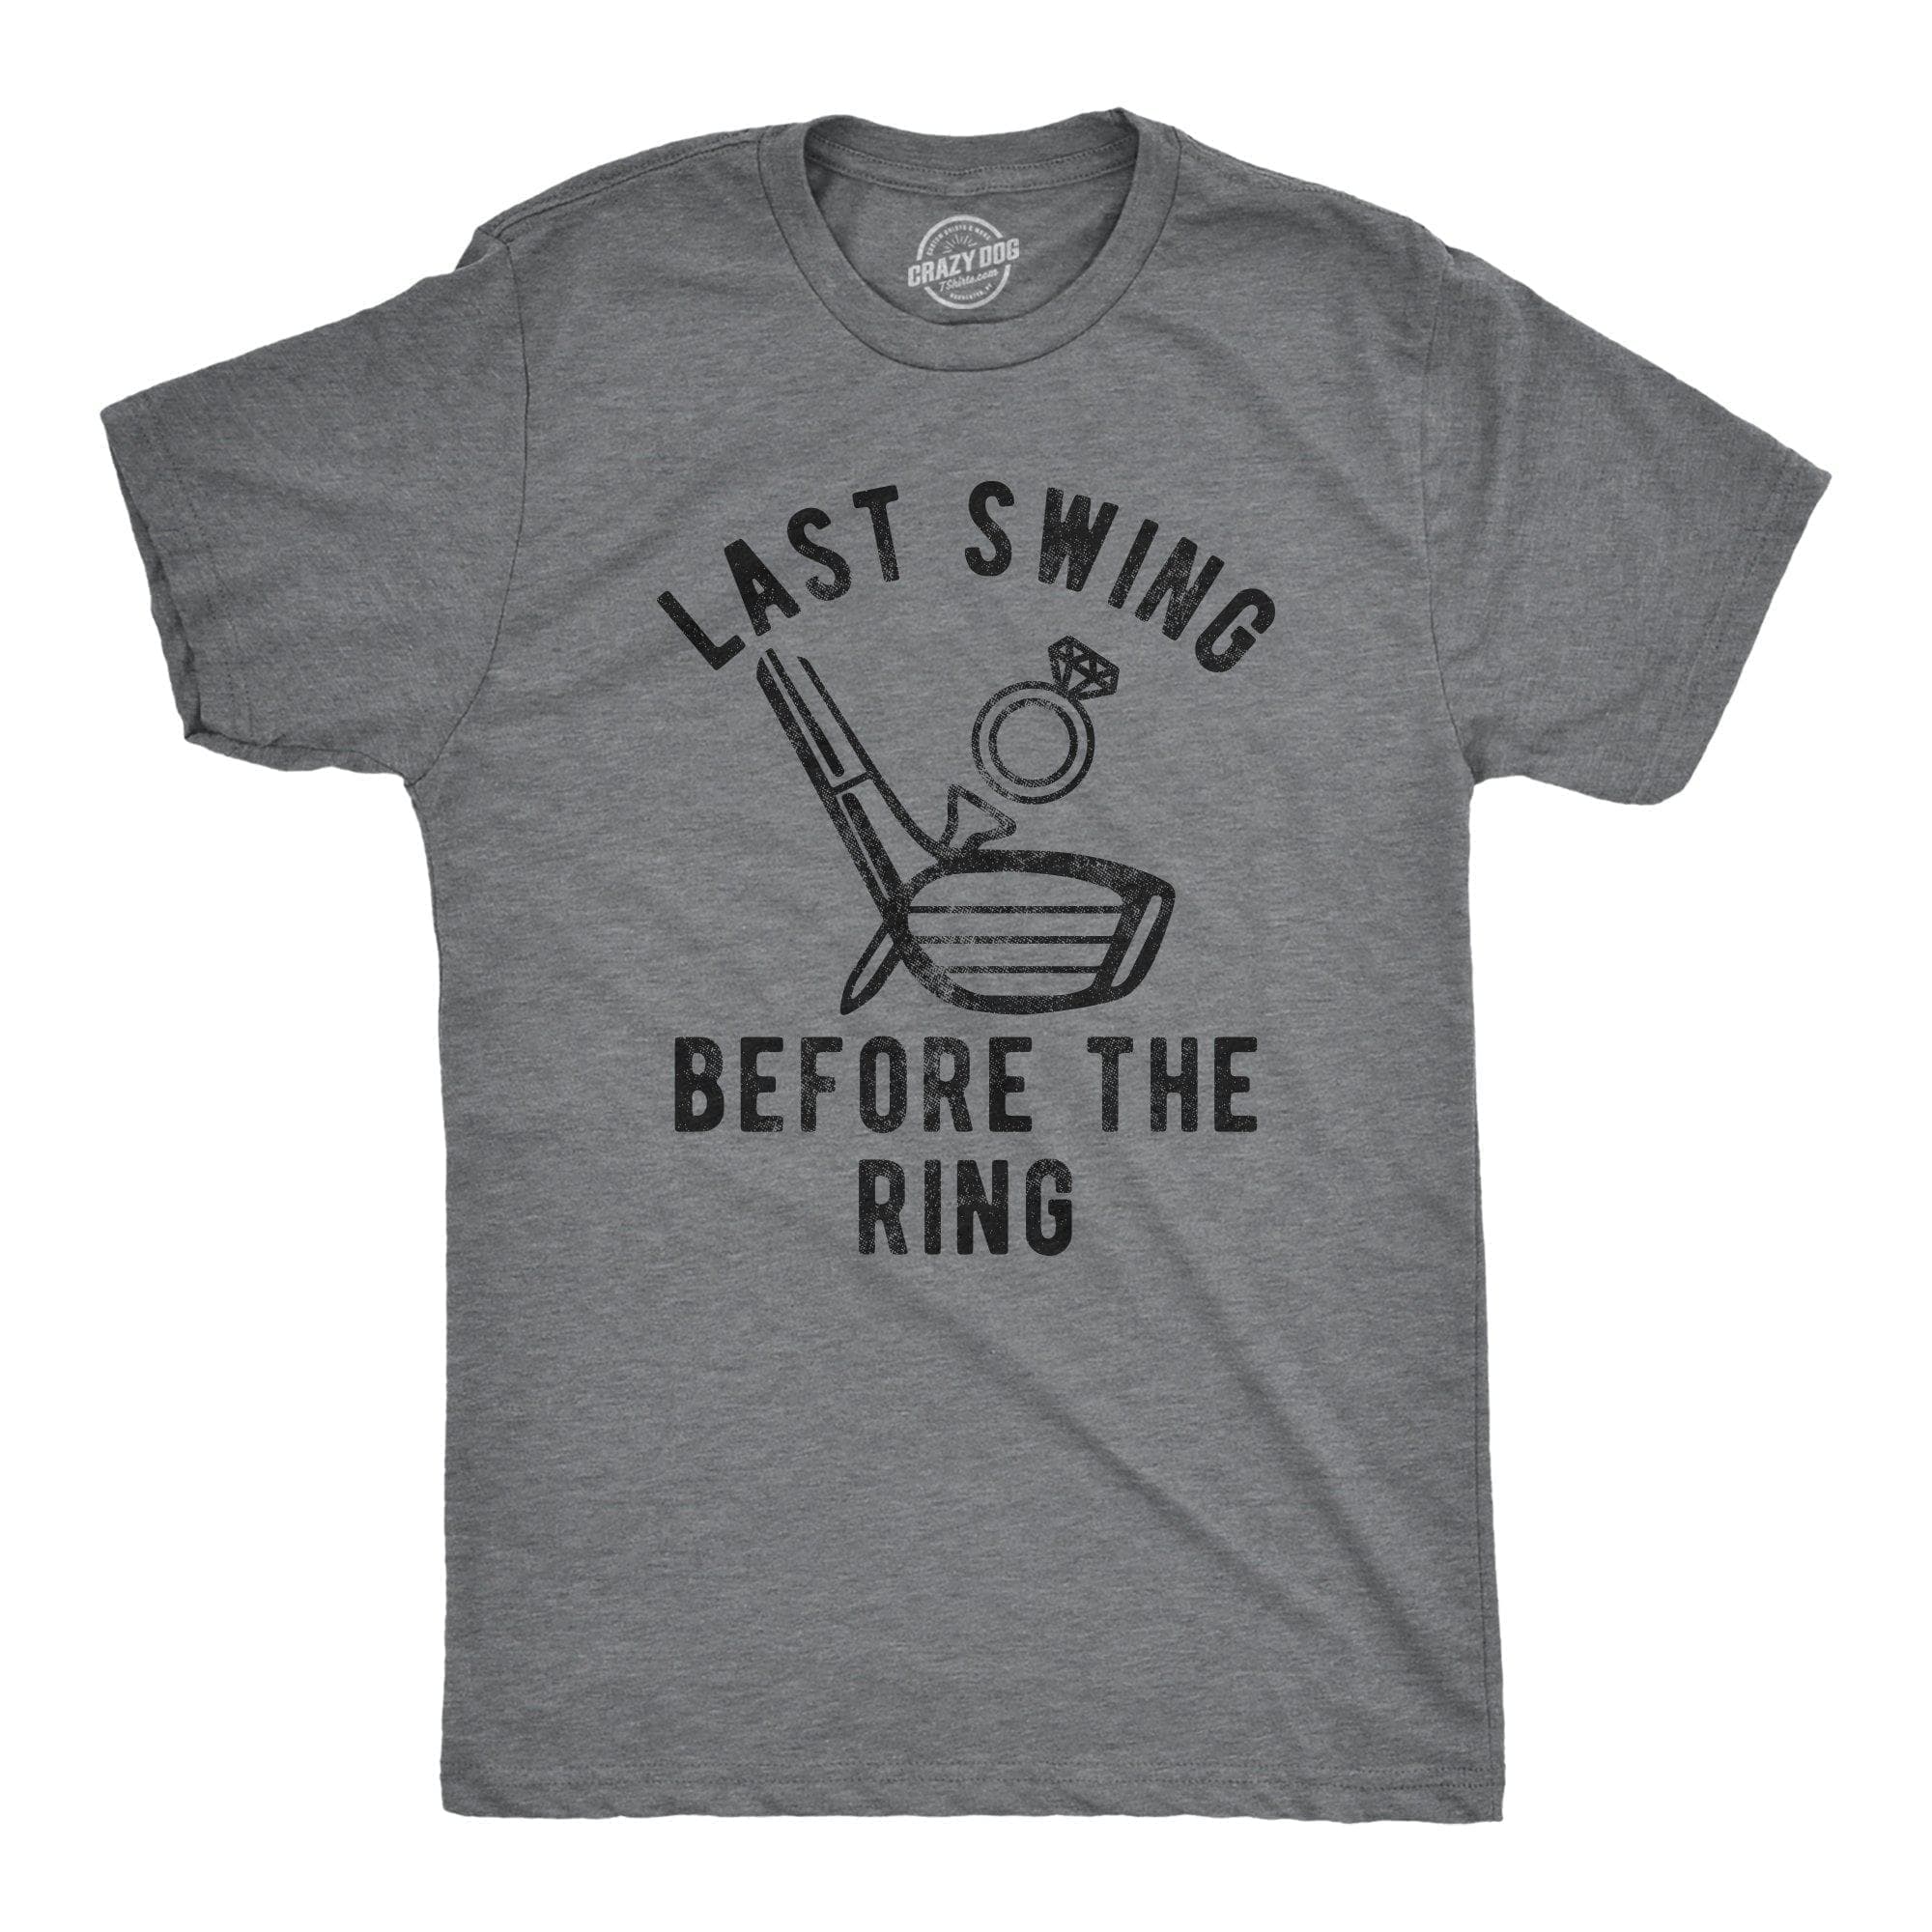 Last Swing Before The Ring Men's Tshirt - Crazy Dog T-Shirts